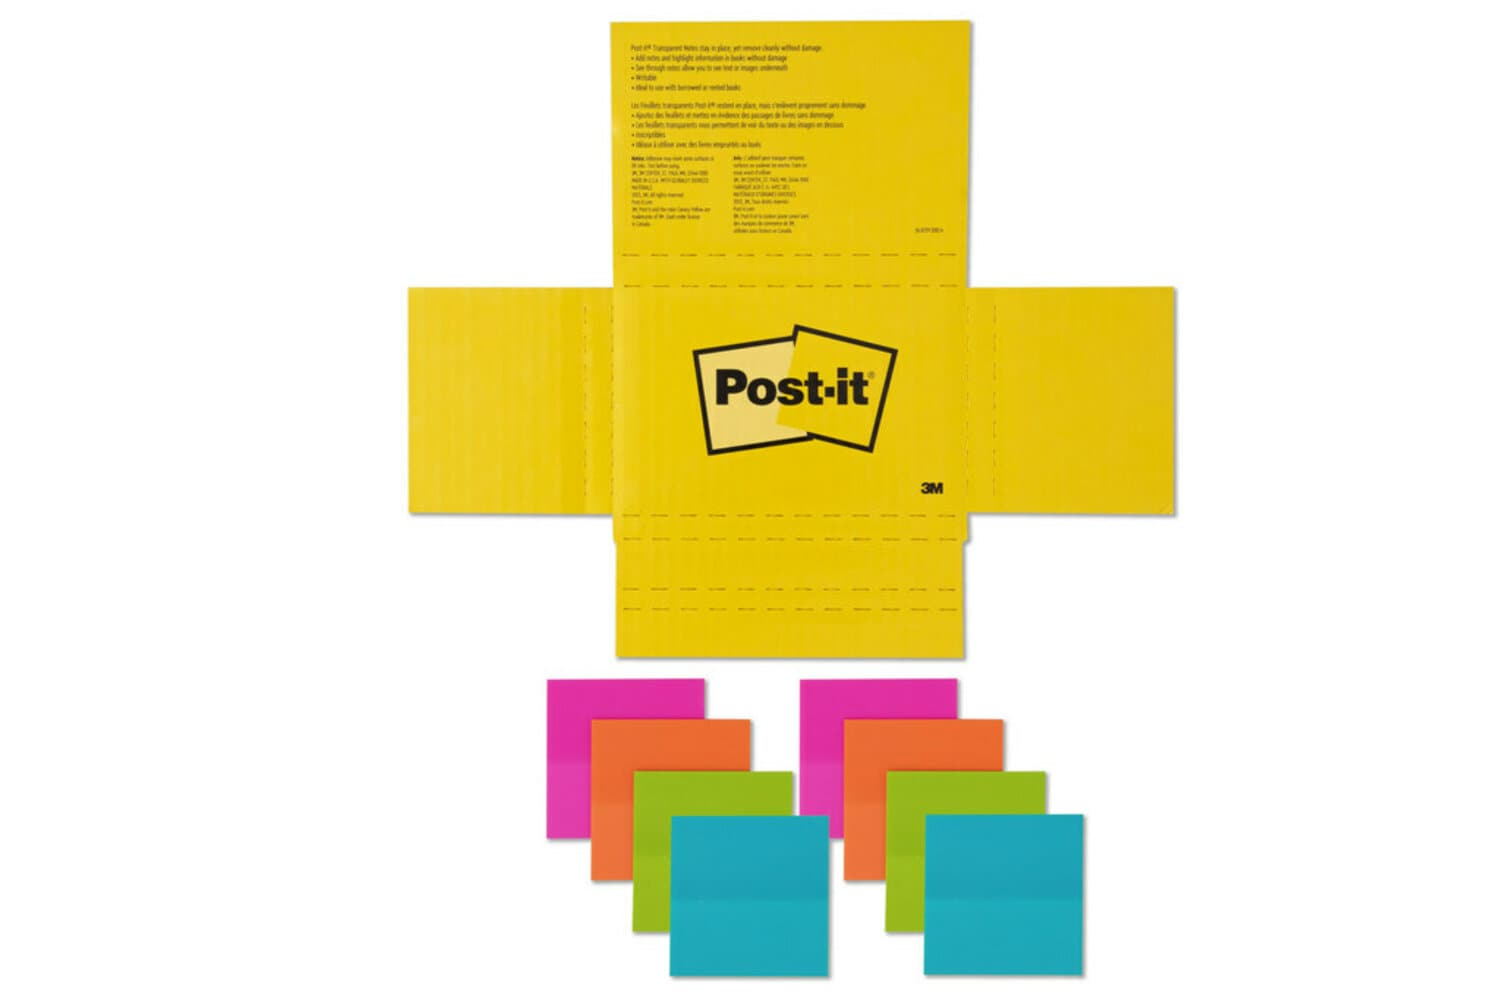 7100301000 - Post-it Transparent Notes 600-8COL-SIOC, 2-7/8 in x 2-7/8 in (73 mm x 73 mm)